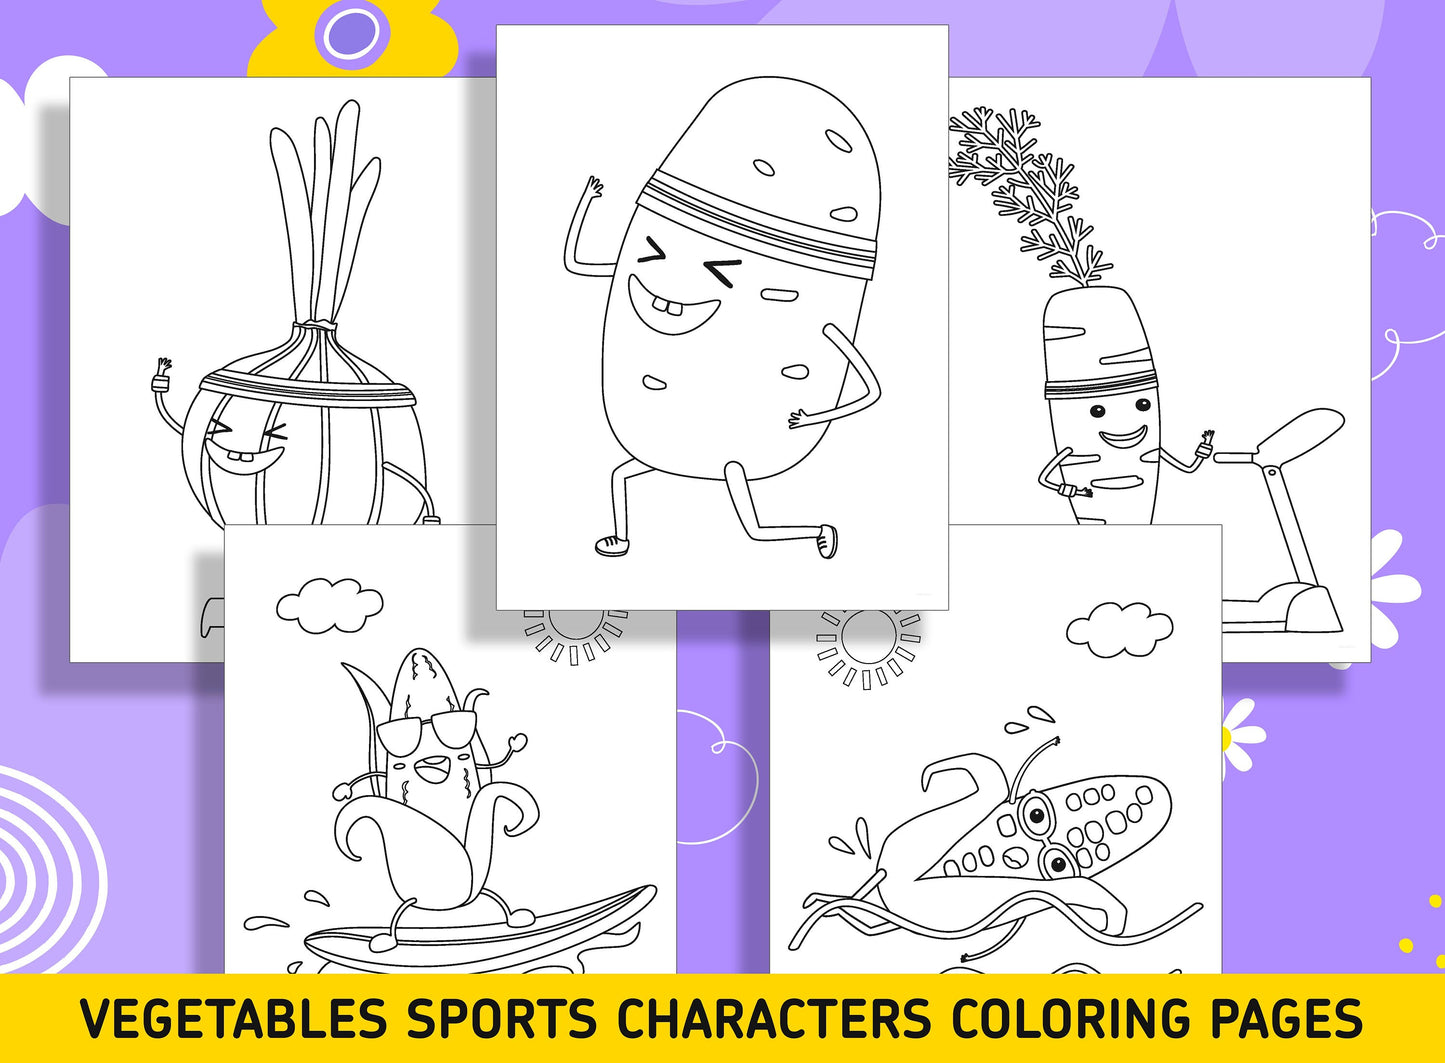 15 Vegetables Sports Characters Coloring Pages, Perfect for Preschool and Kindergarten, PDF File, Instant Download